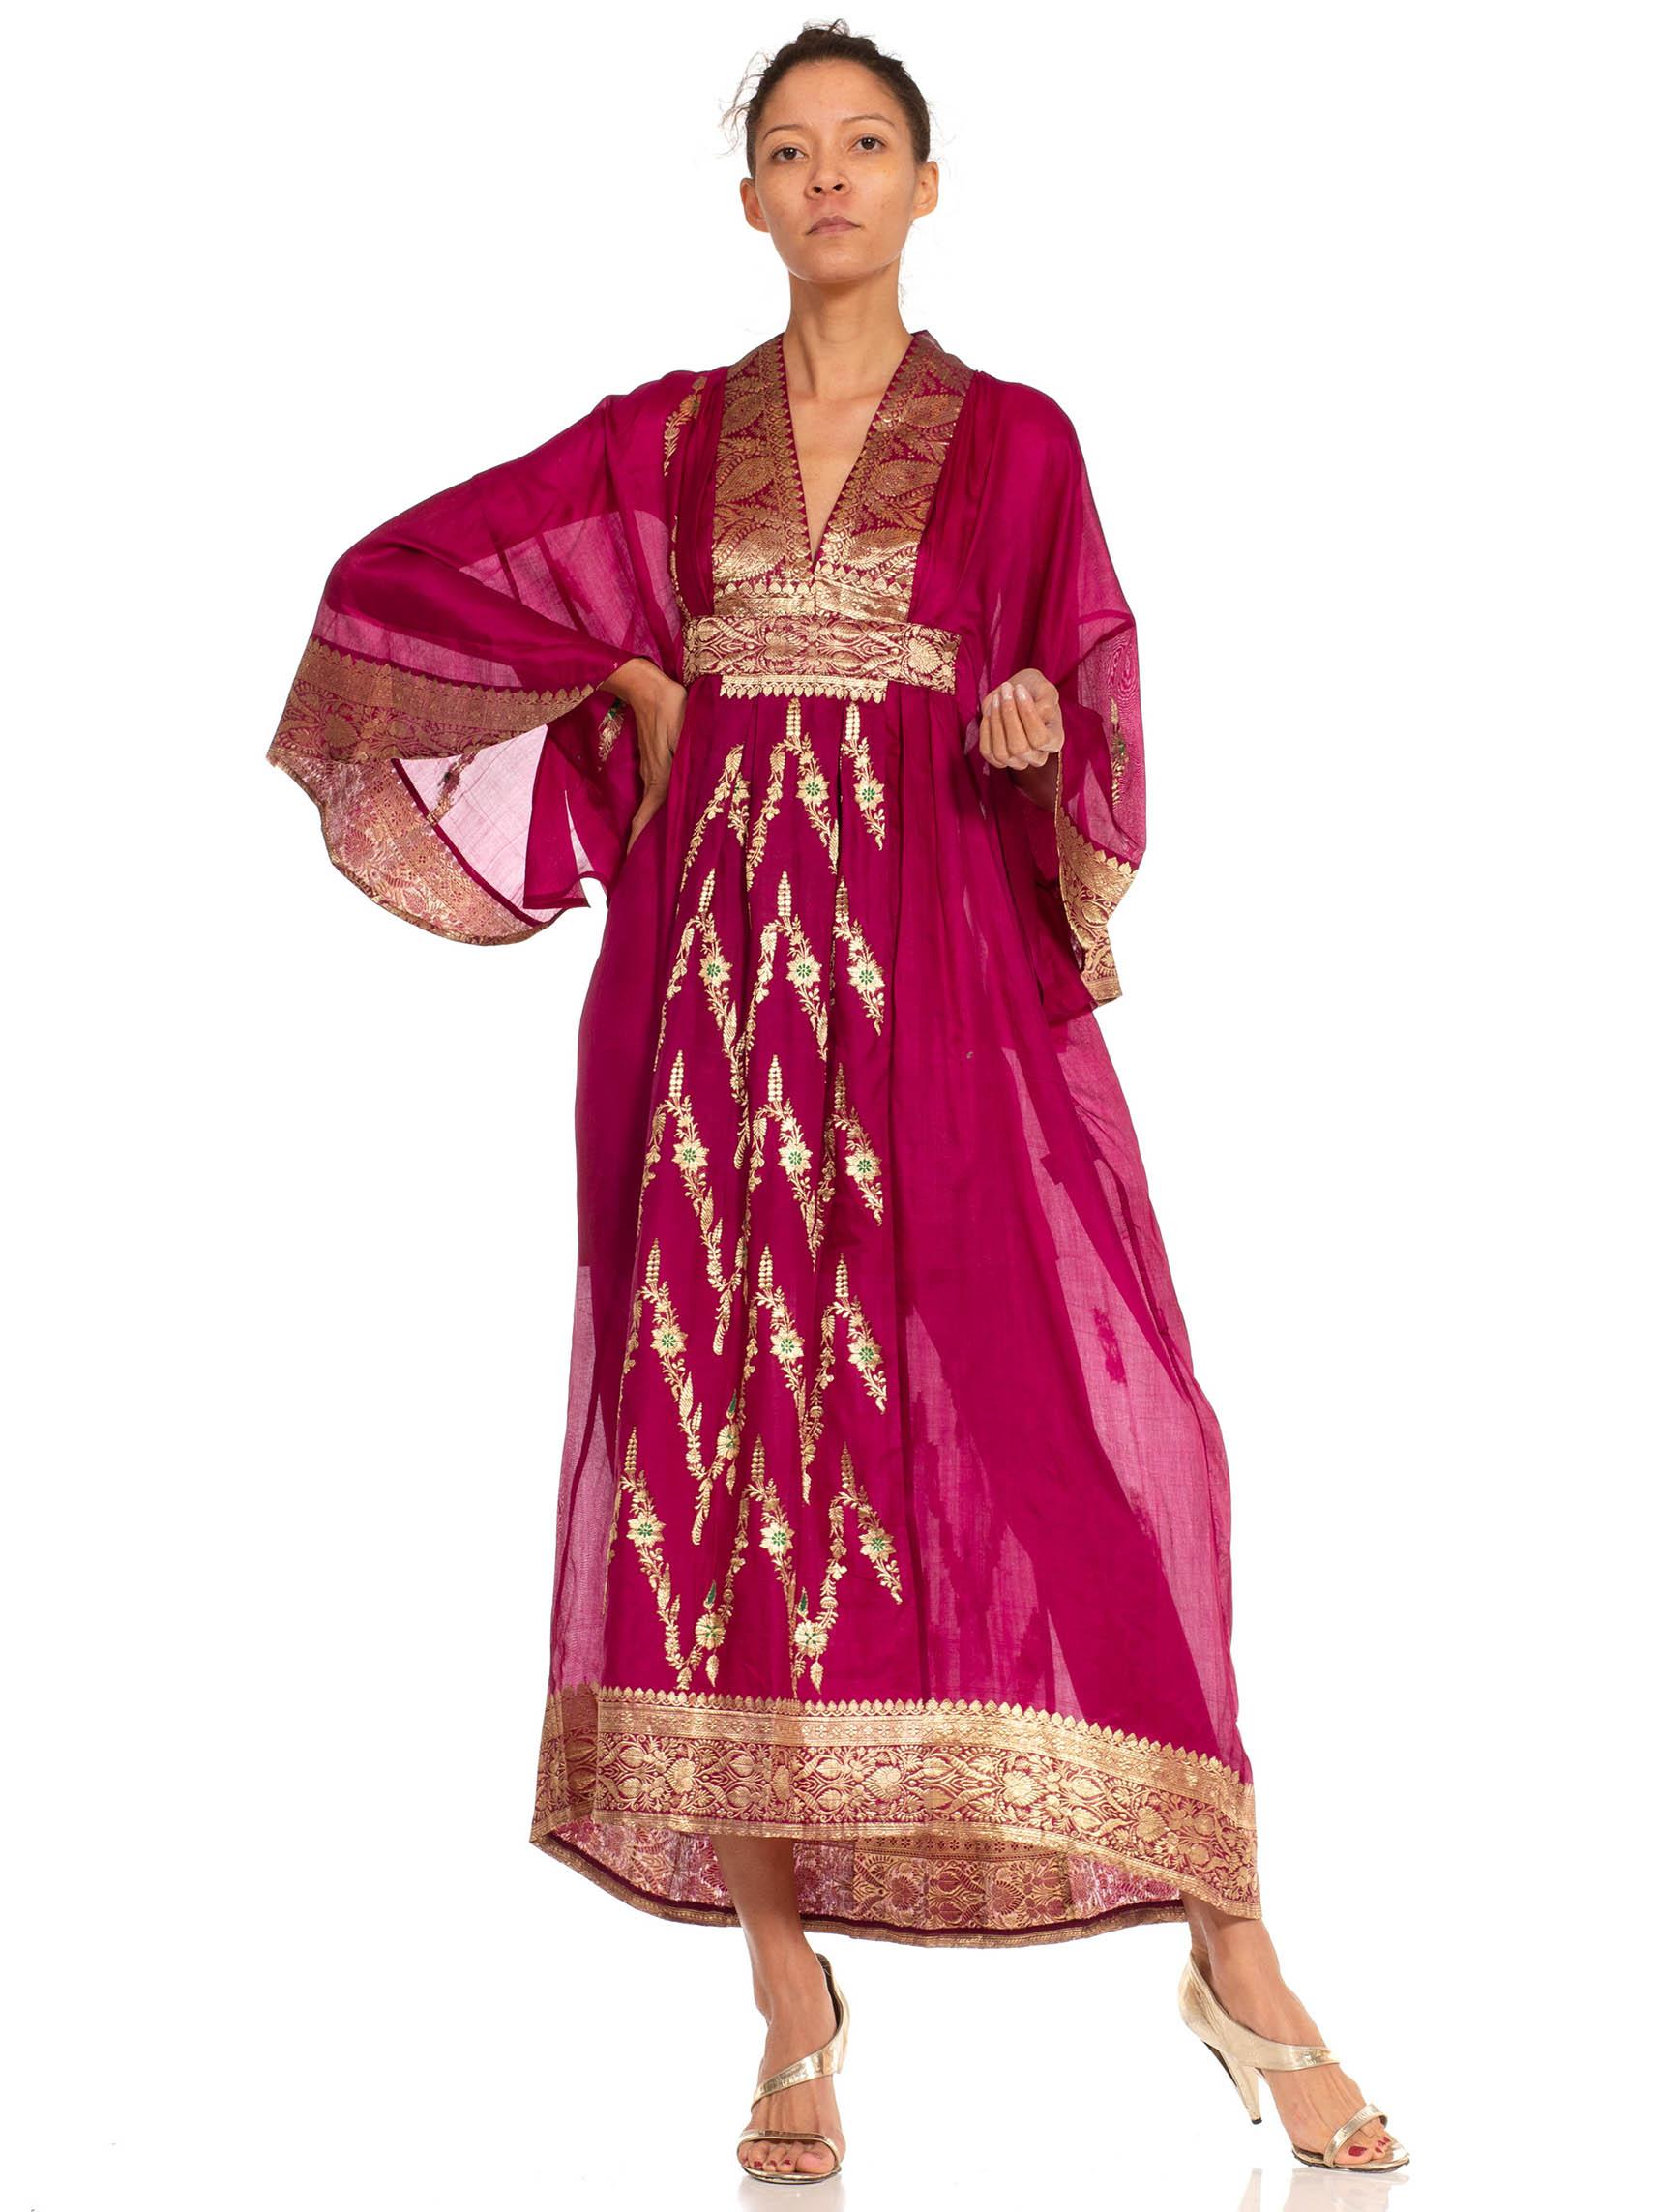 Morphew Collection Fuchsia & Gold Silk Kaftan Made From Vintage Saris For Sale 4